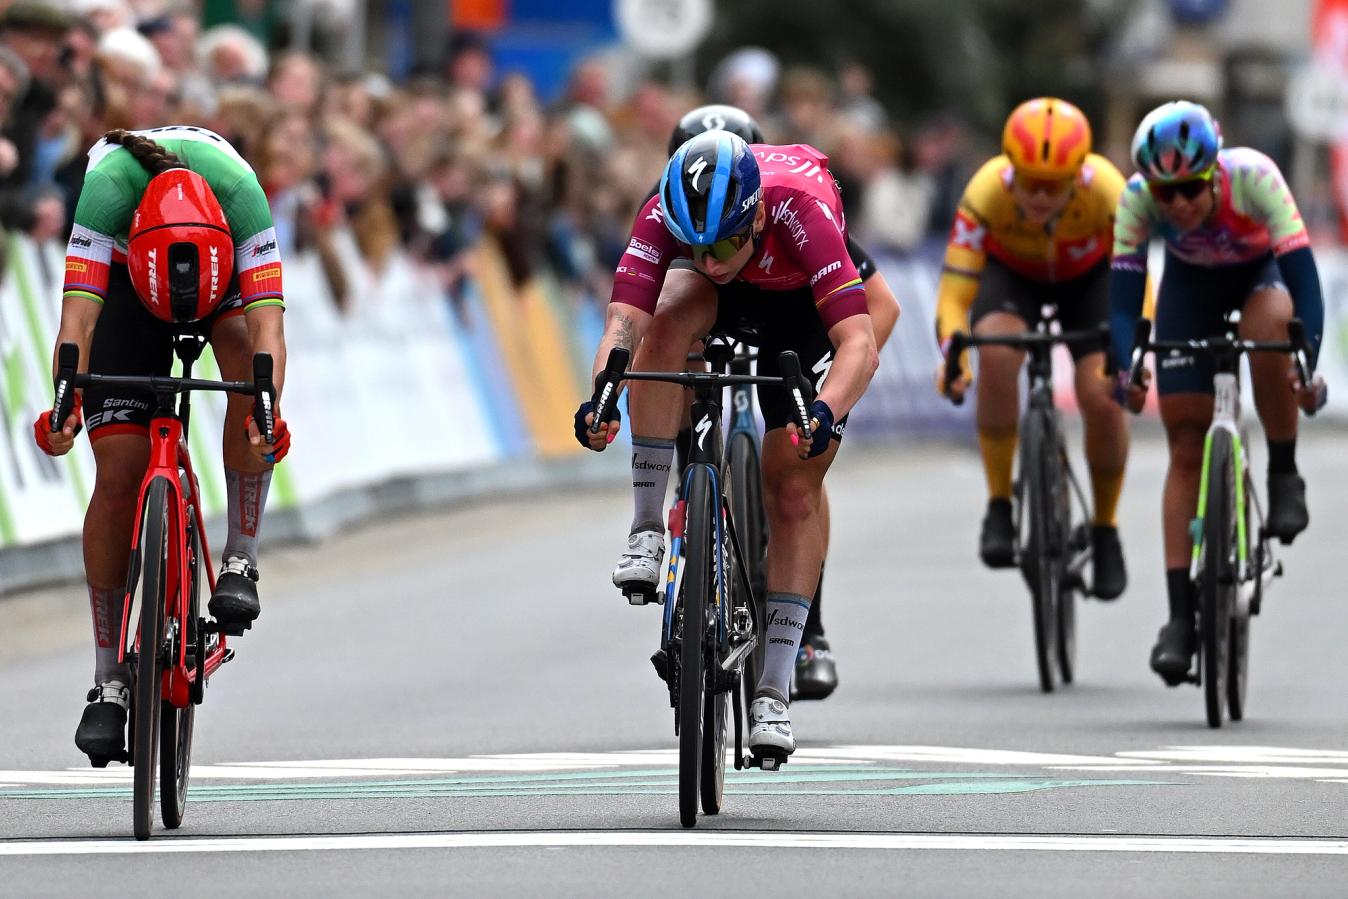 Elisa Balsamo has beaten Lorena Wiebes this year - in the sprint for second at Brugge-De Panne. 